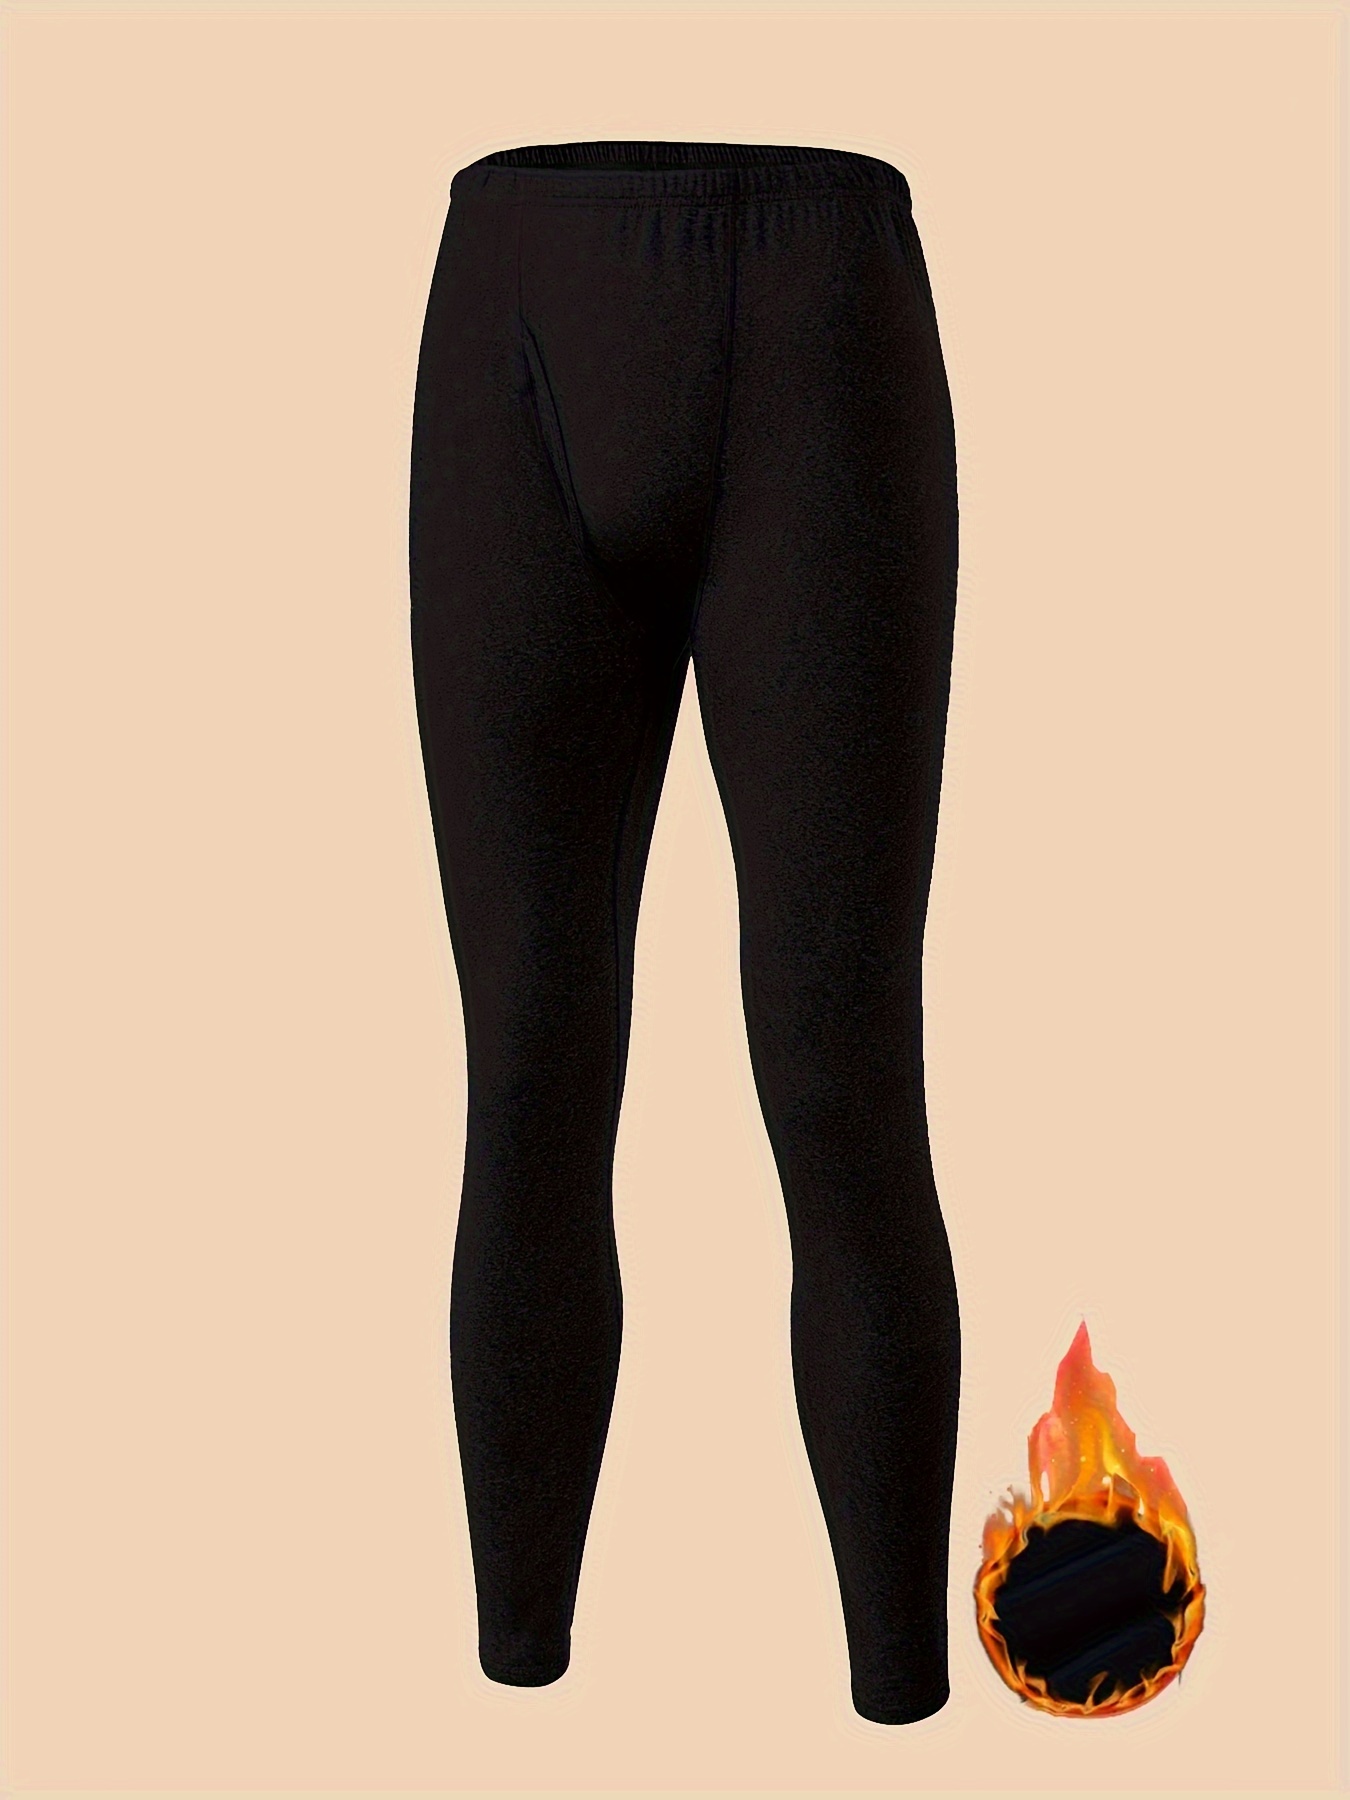 Men's Thermal Underwear, Ultra Soft Trousers Bottoming, Warm Leggings For  Skiing, Indoor, Outdoor Cold Winter